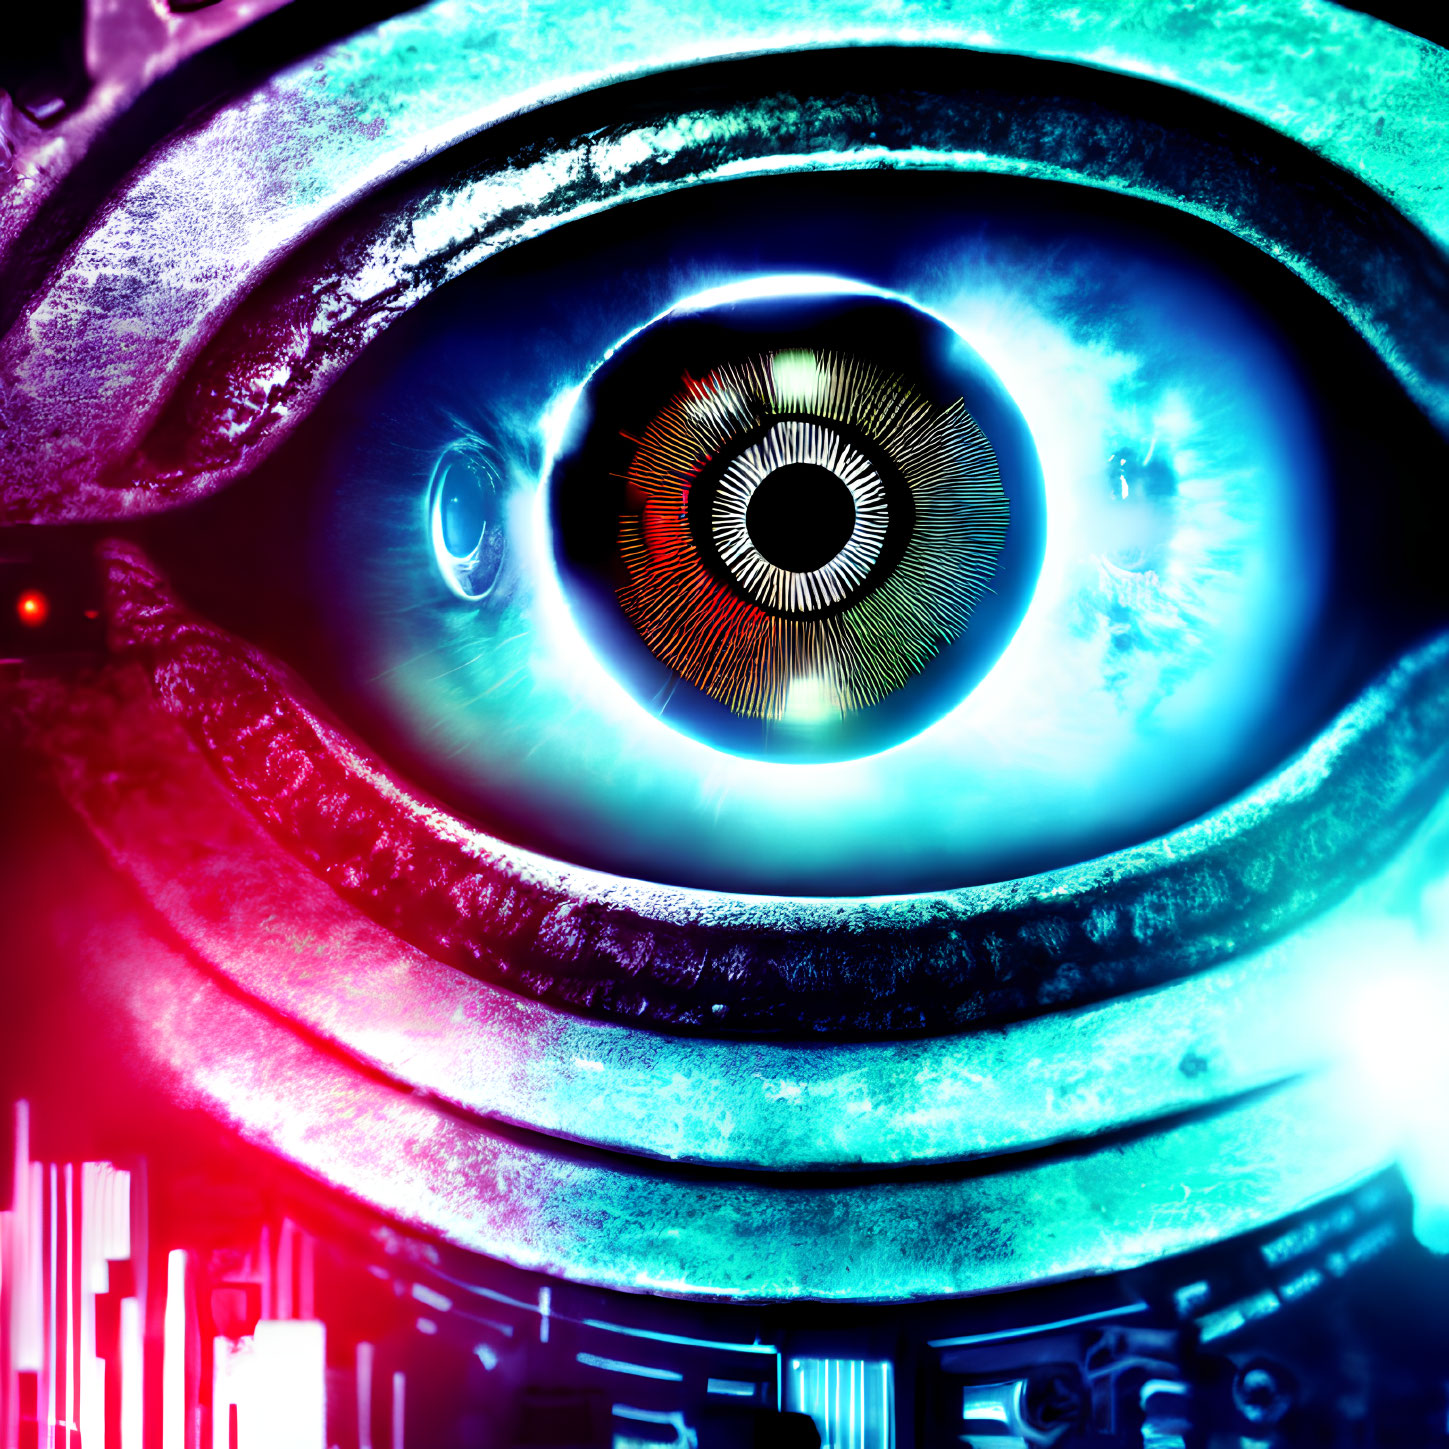 Colorful Close-Up of Stylized Robotic Eye with Glowing Iris